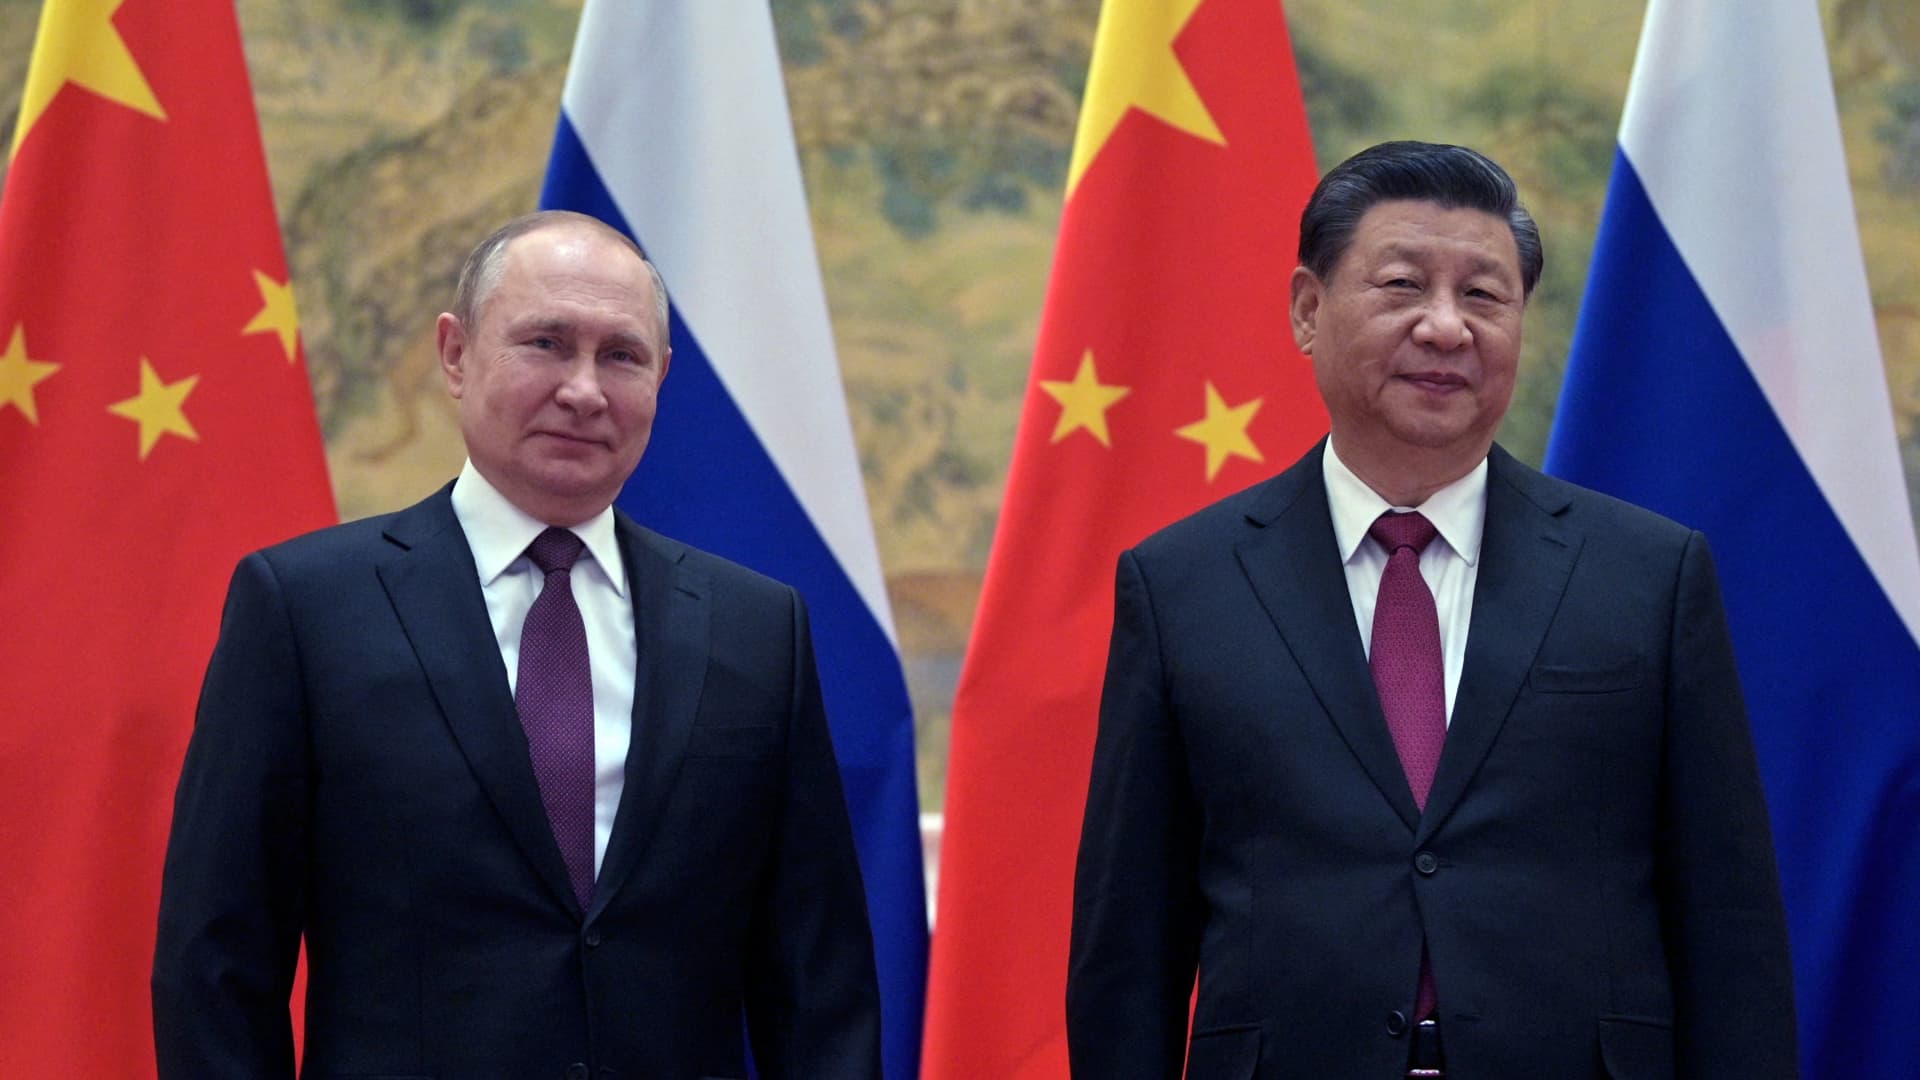 Russian President Vladimir Putin and Chinese President Xi Jinping plan to meet next week in Uzbekistan at the Shanghai Cooperation Organization forum, a Russian official said on Wednesday.